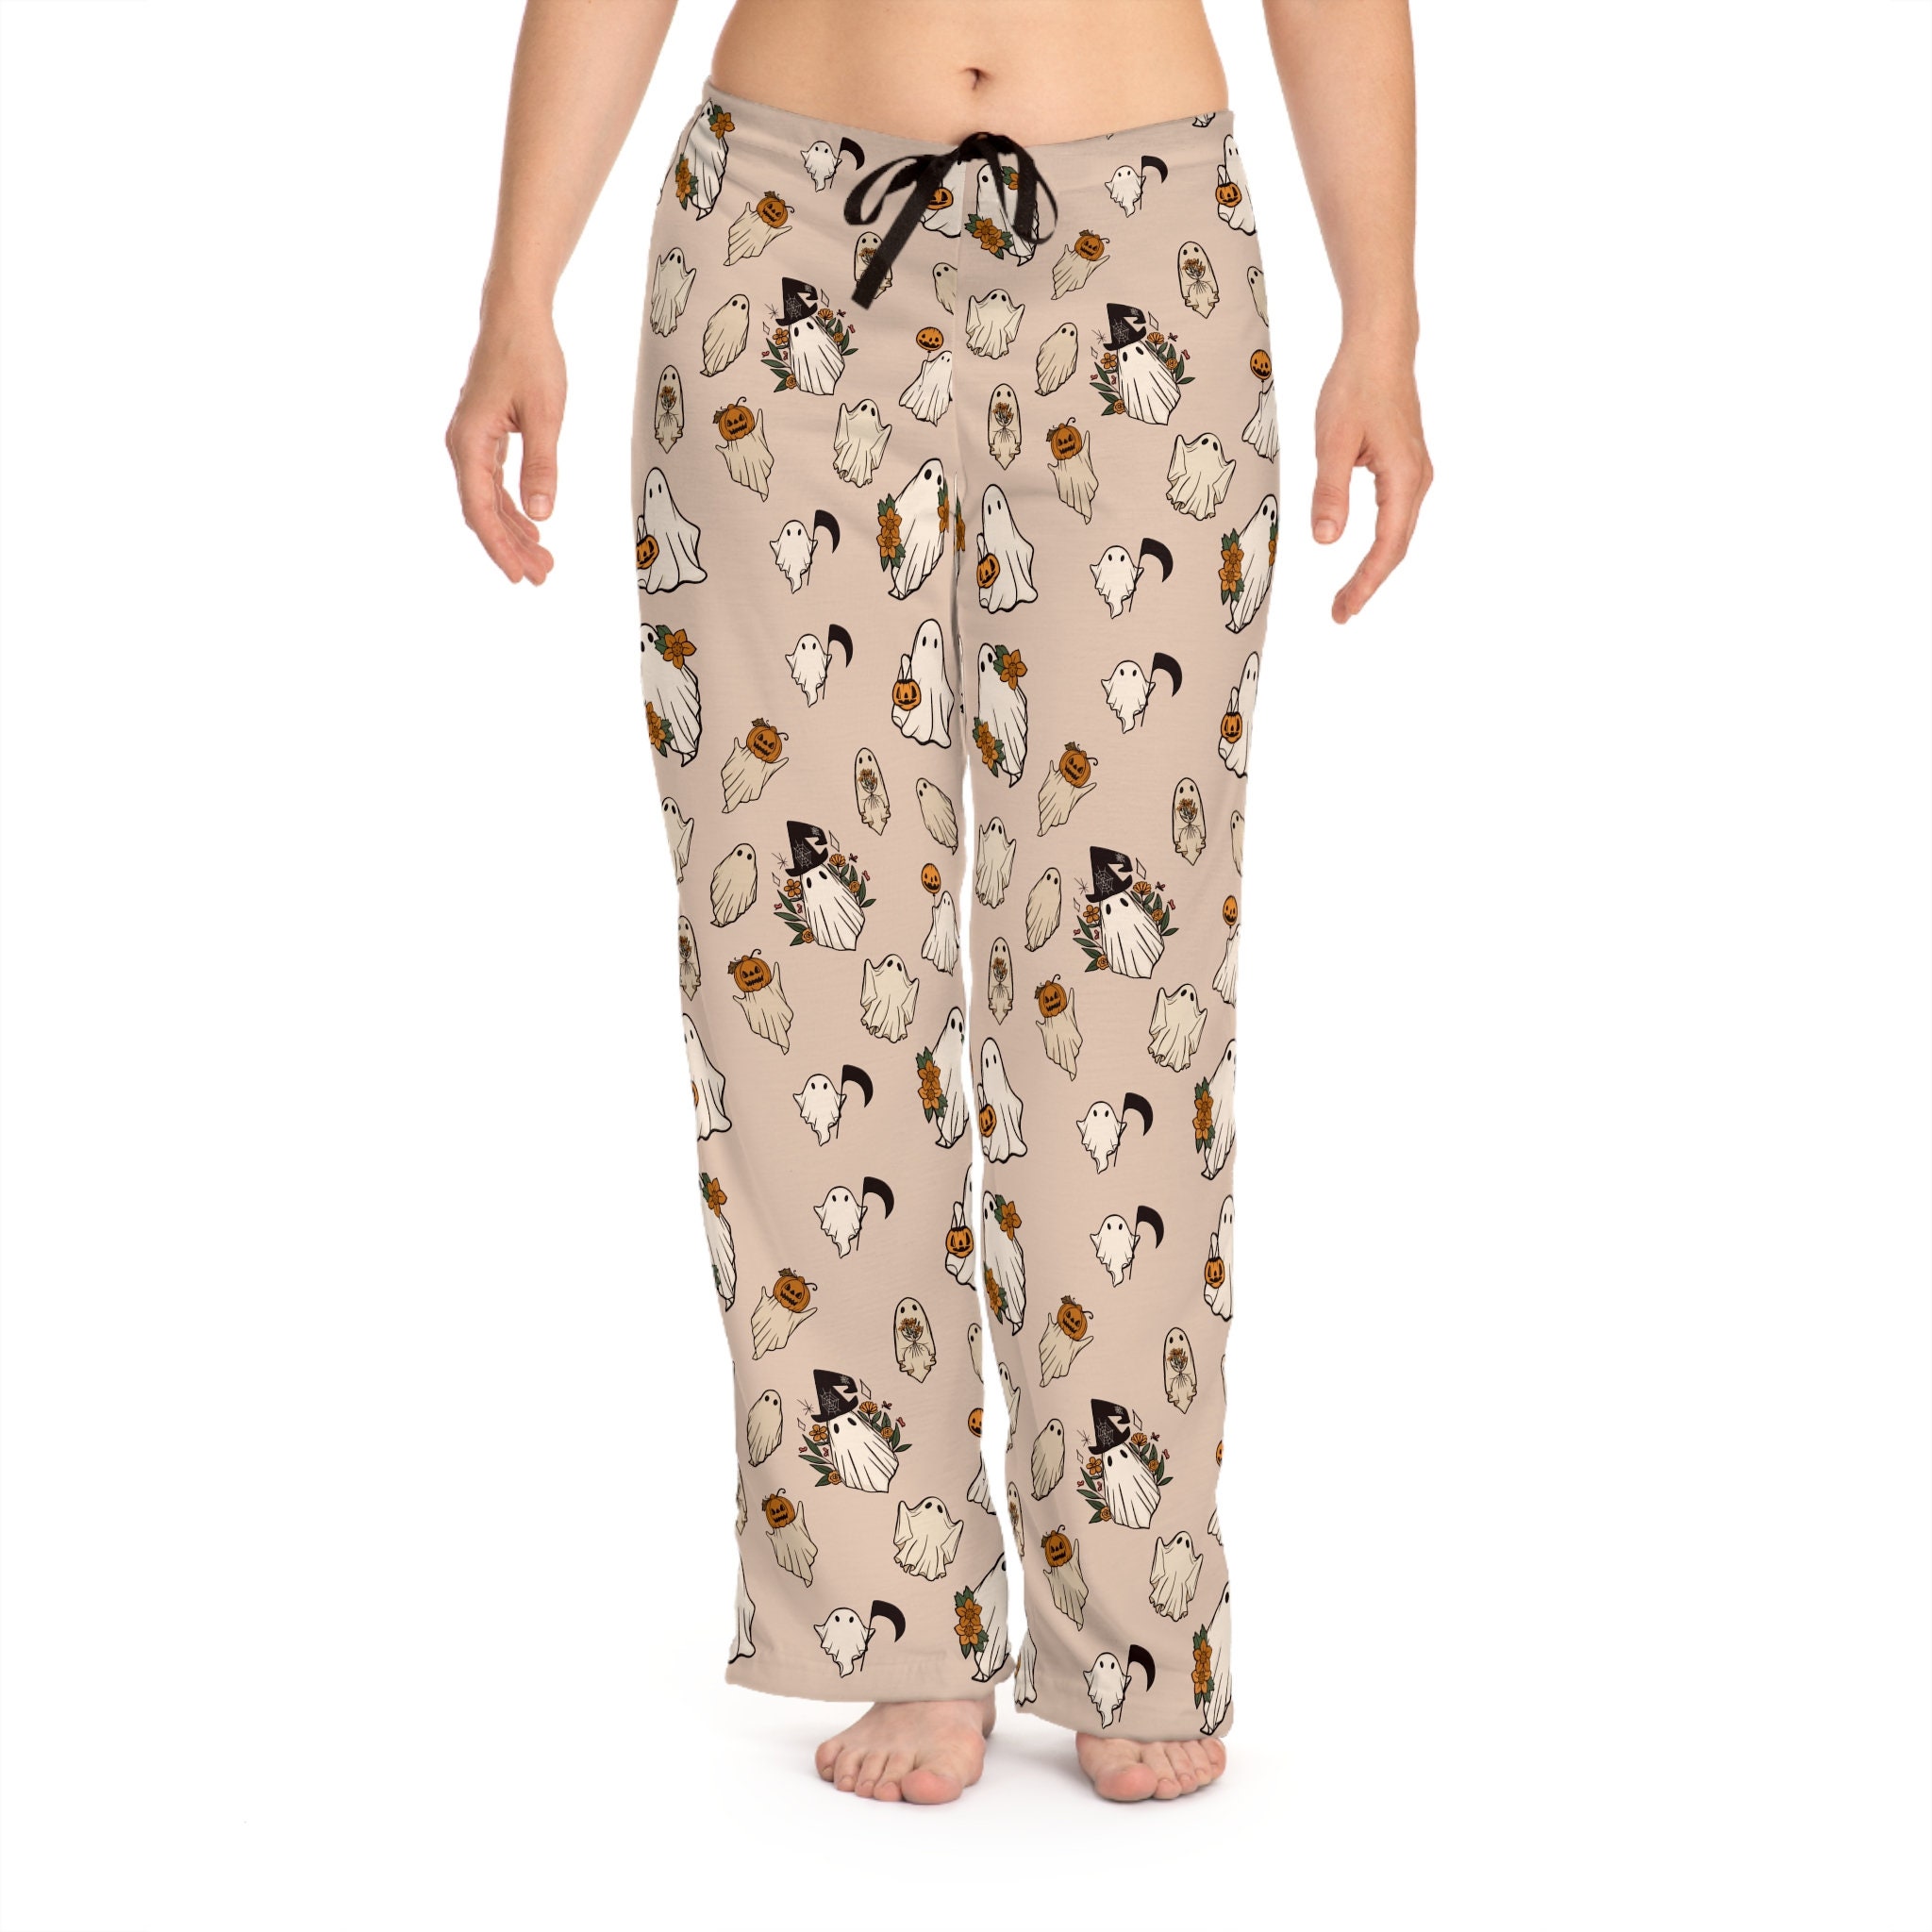 Shosho New Black and Trick or Treat 2 pack of Halloween lounge pants pjs Sz  S/M - $20 New With Tags - From Teri